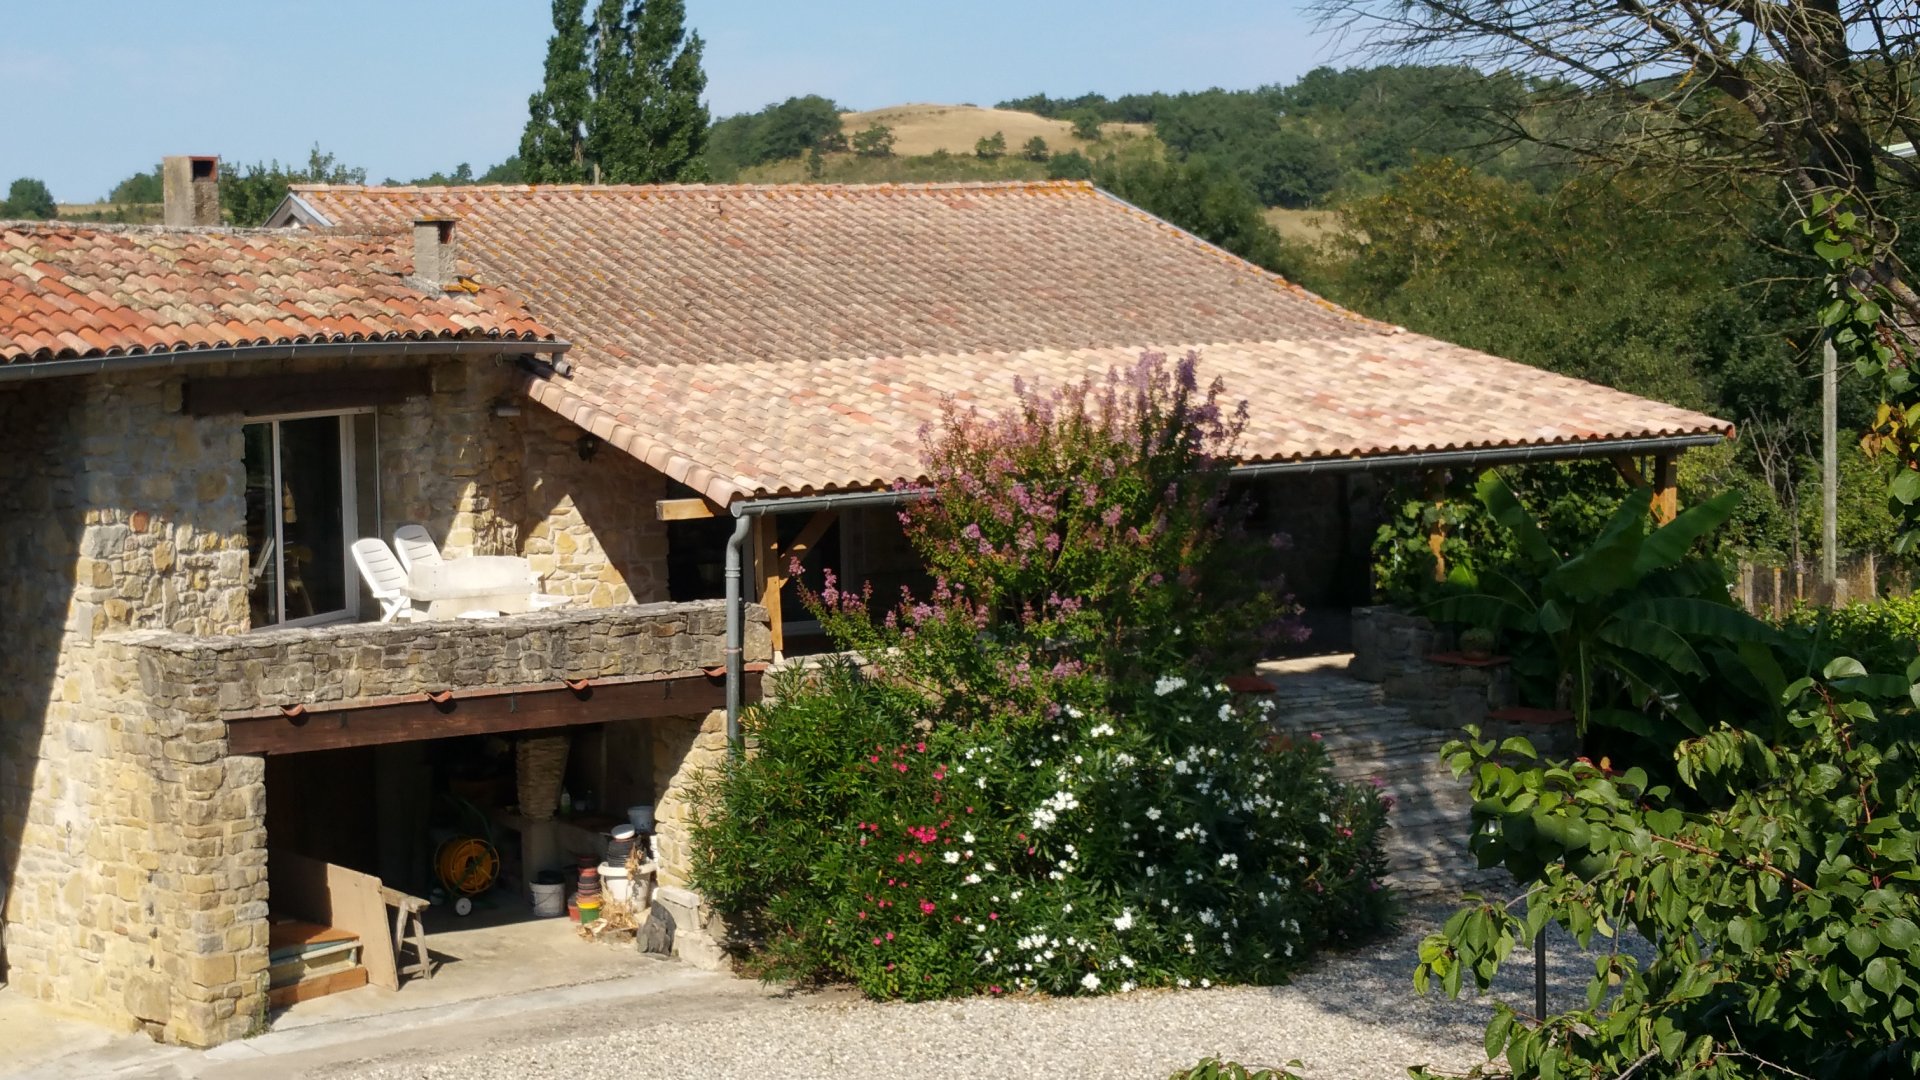 Self Catering Holiday Accommodation Near Mirepoix In The French